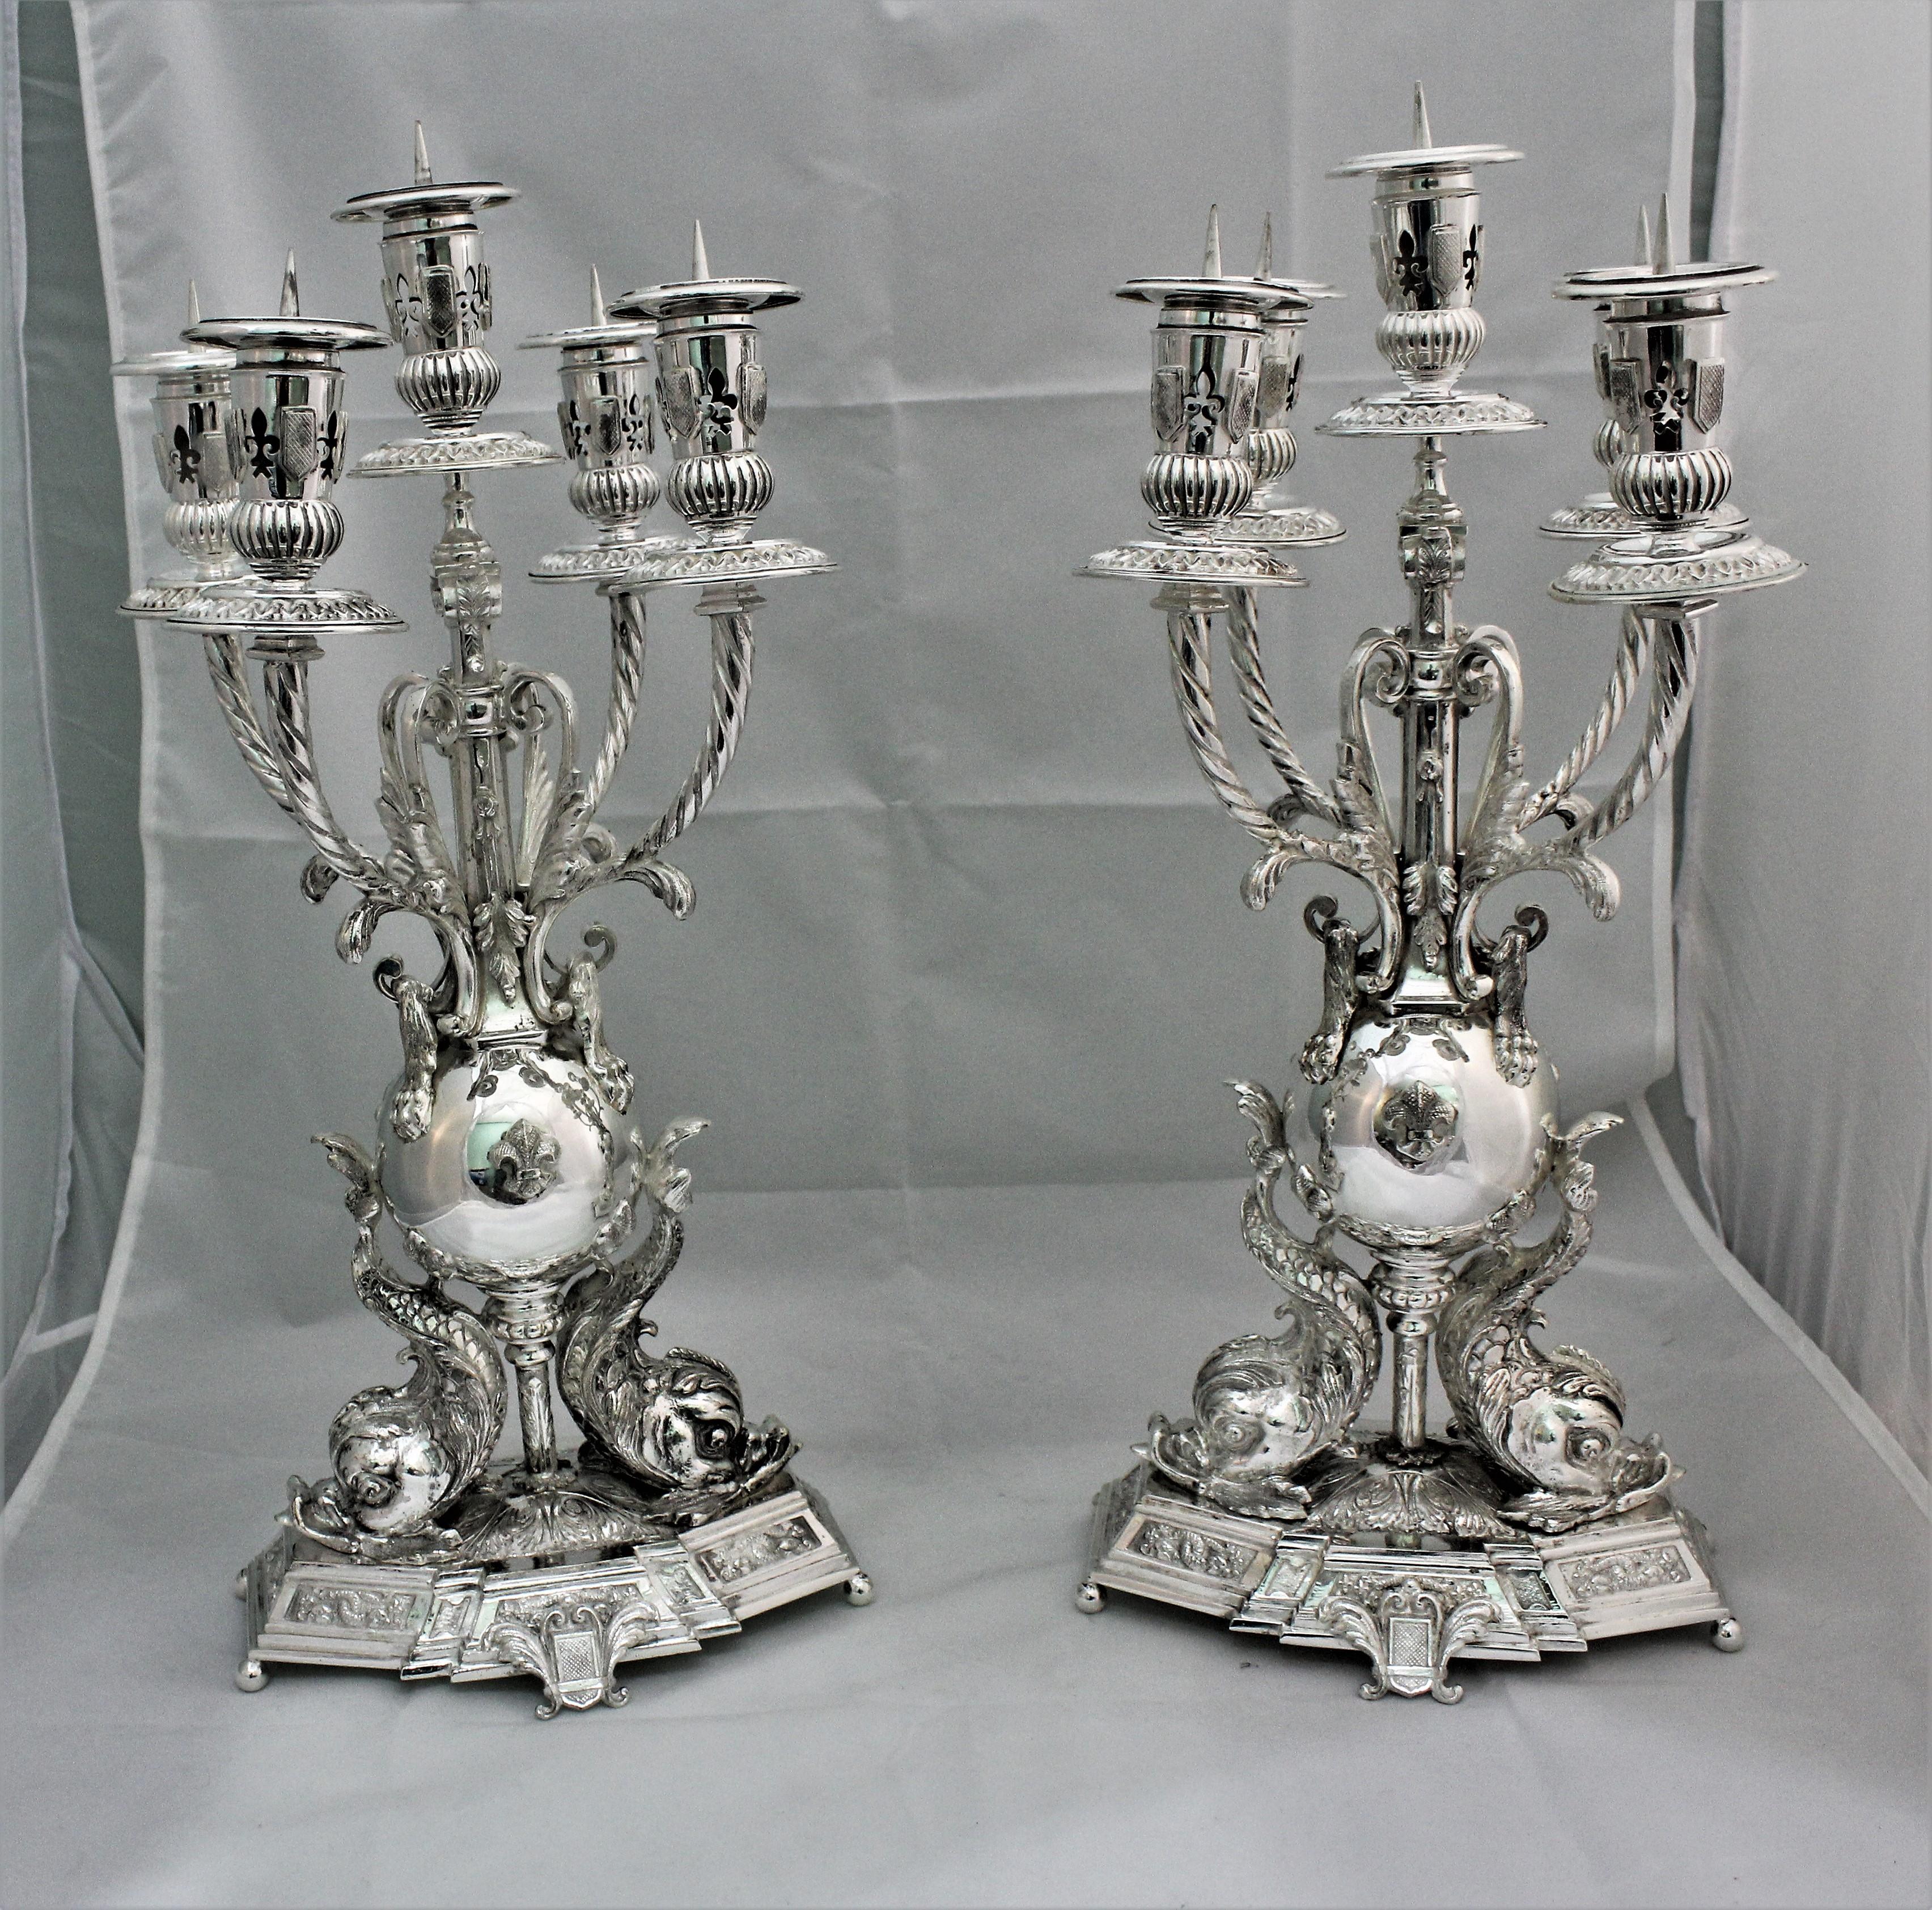 Pair of silver candelabras realized around 1950s in Florence by the famous Florentine silversmith 
Brandimarte.
Impressive dimension H 52 cm x 22 x 20 cm – total weight over 7 kg
Base octagonal upon which there are 2 tritons holding the upper